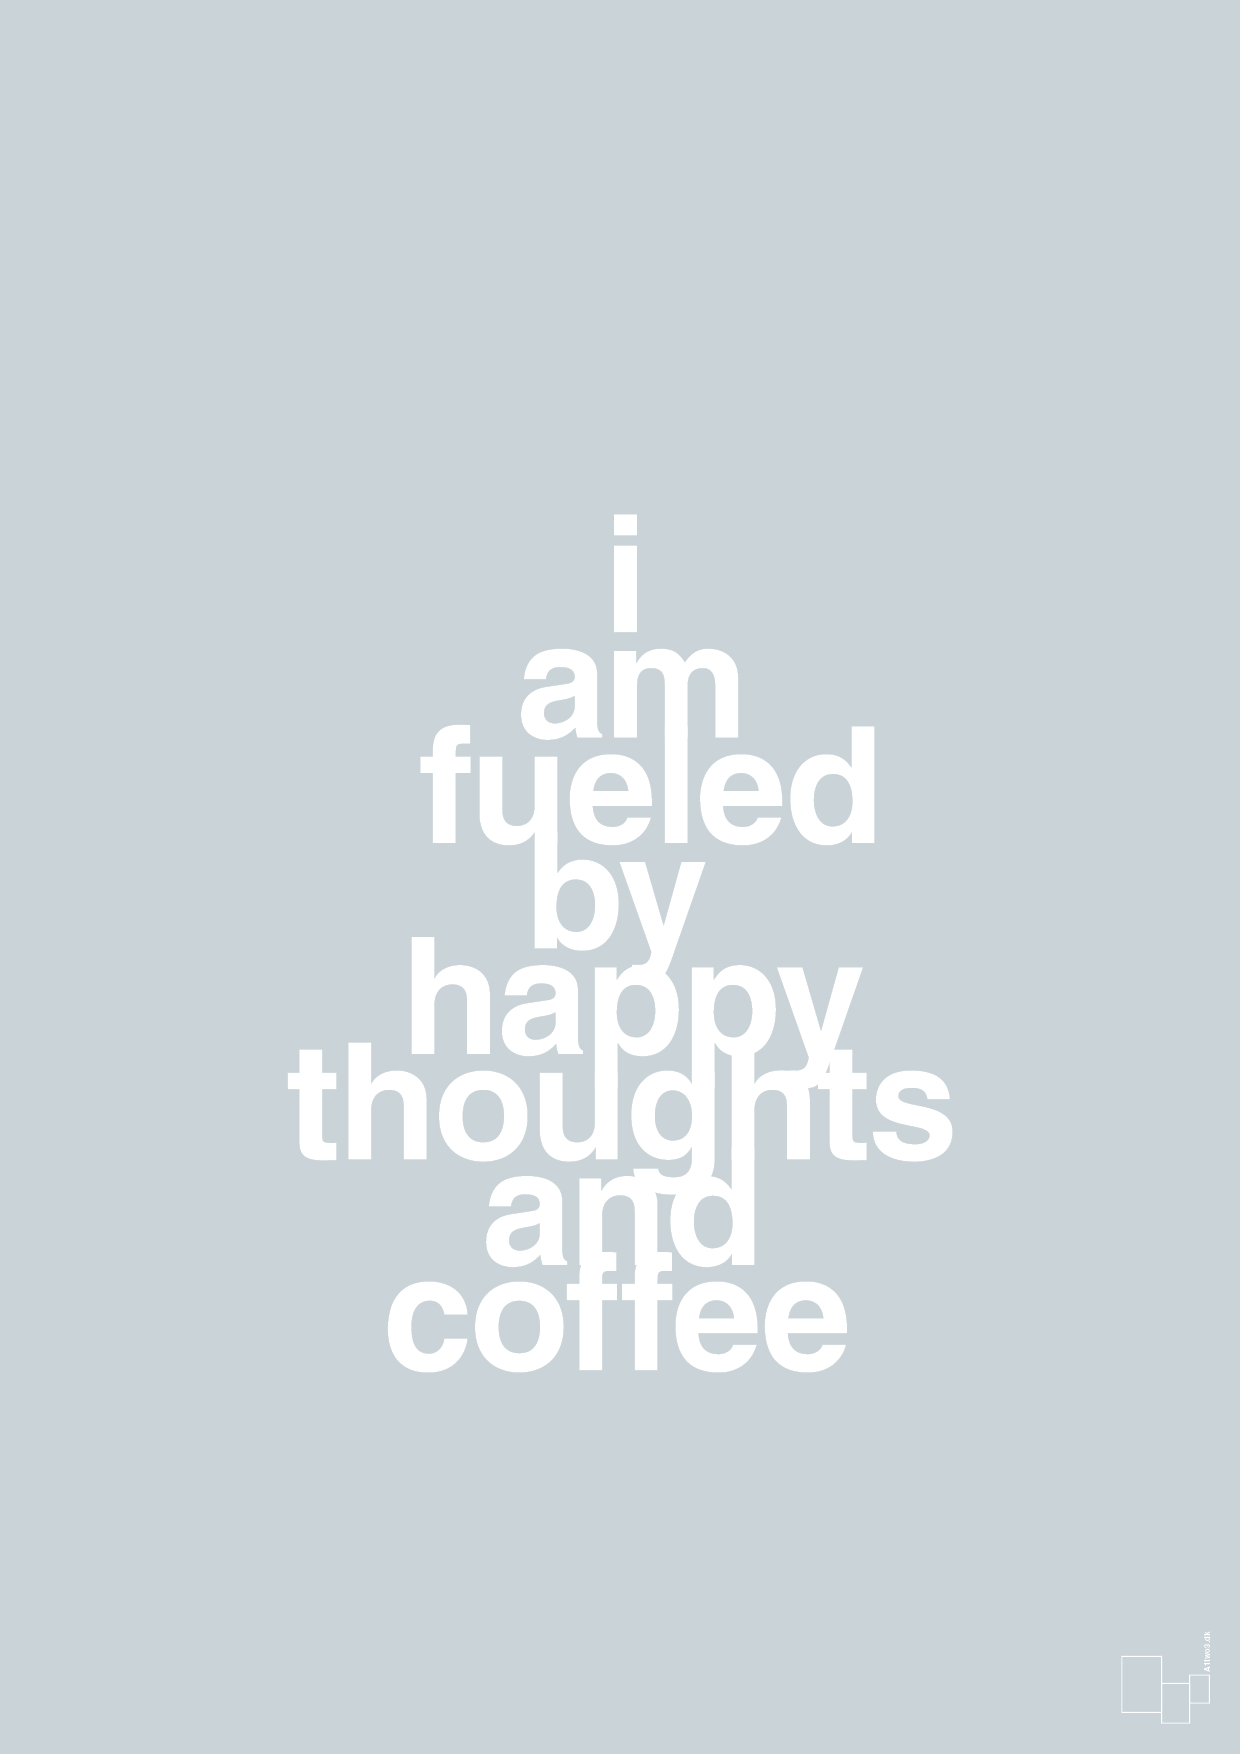 i am fueled by happy thoughts and coffee - Plakat med Mad & Drikke i Light Drizzle